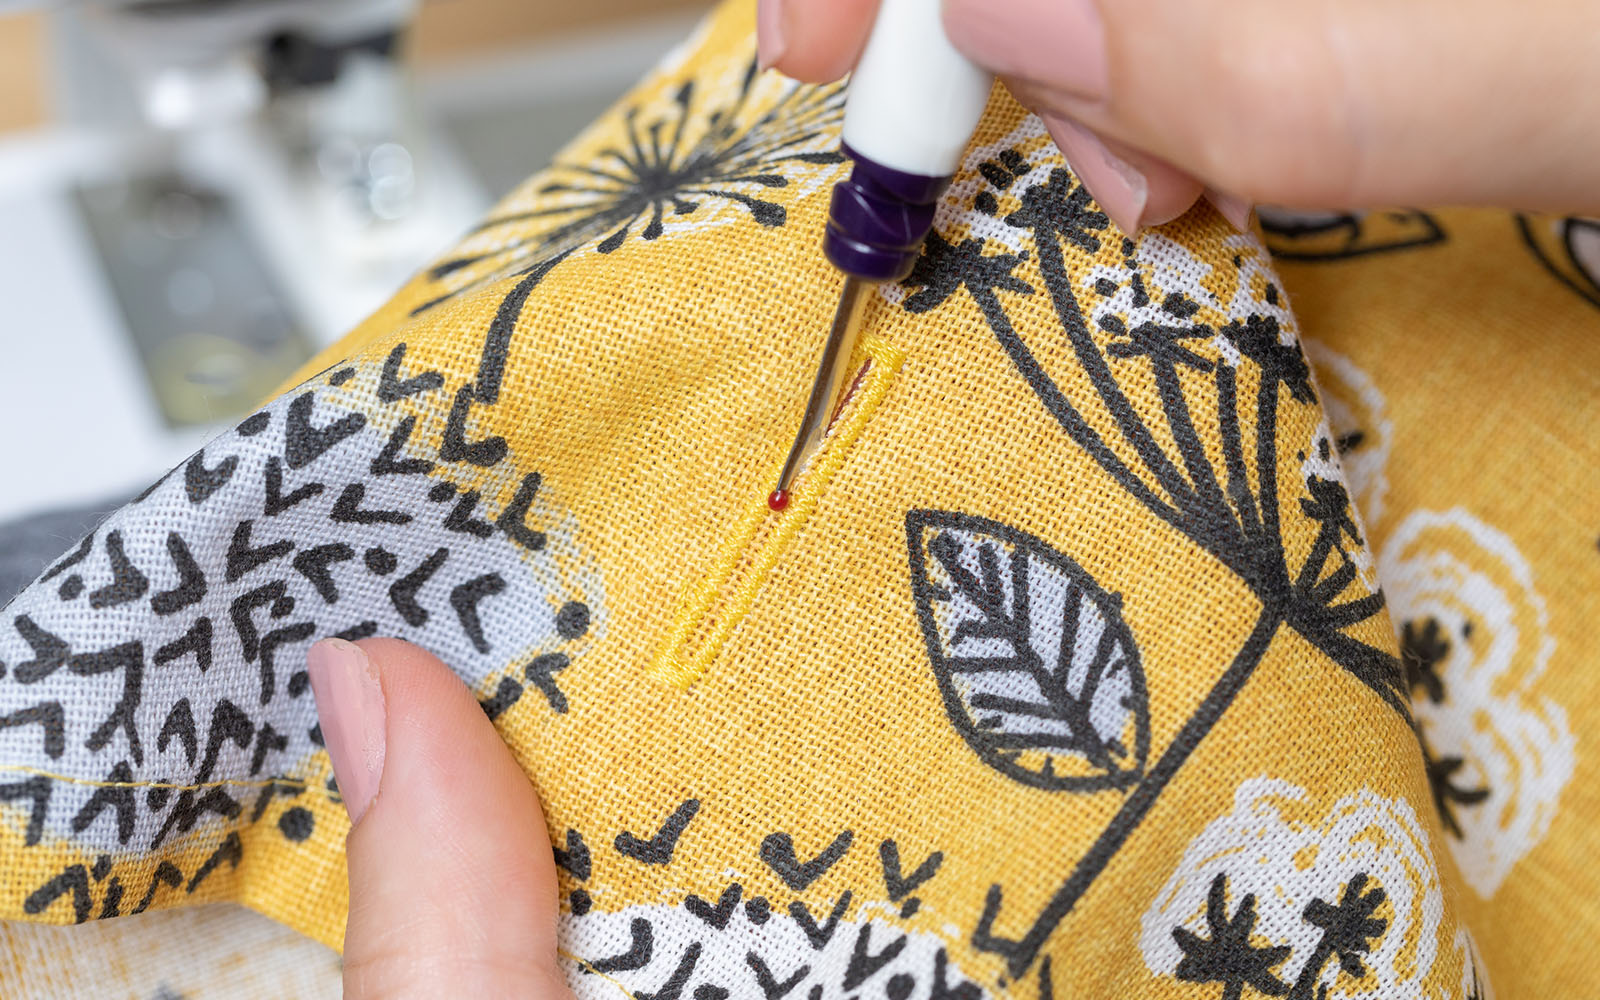 Seam ripper opening buttonhole in yellow material